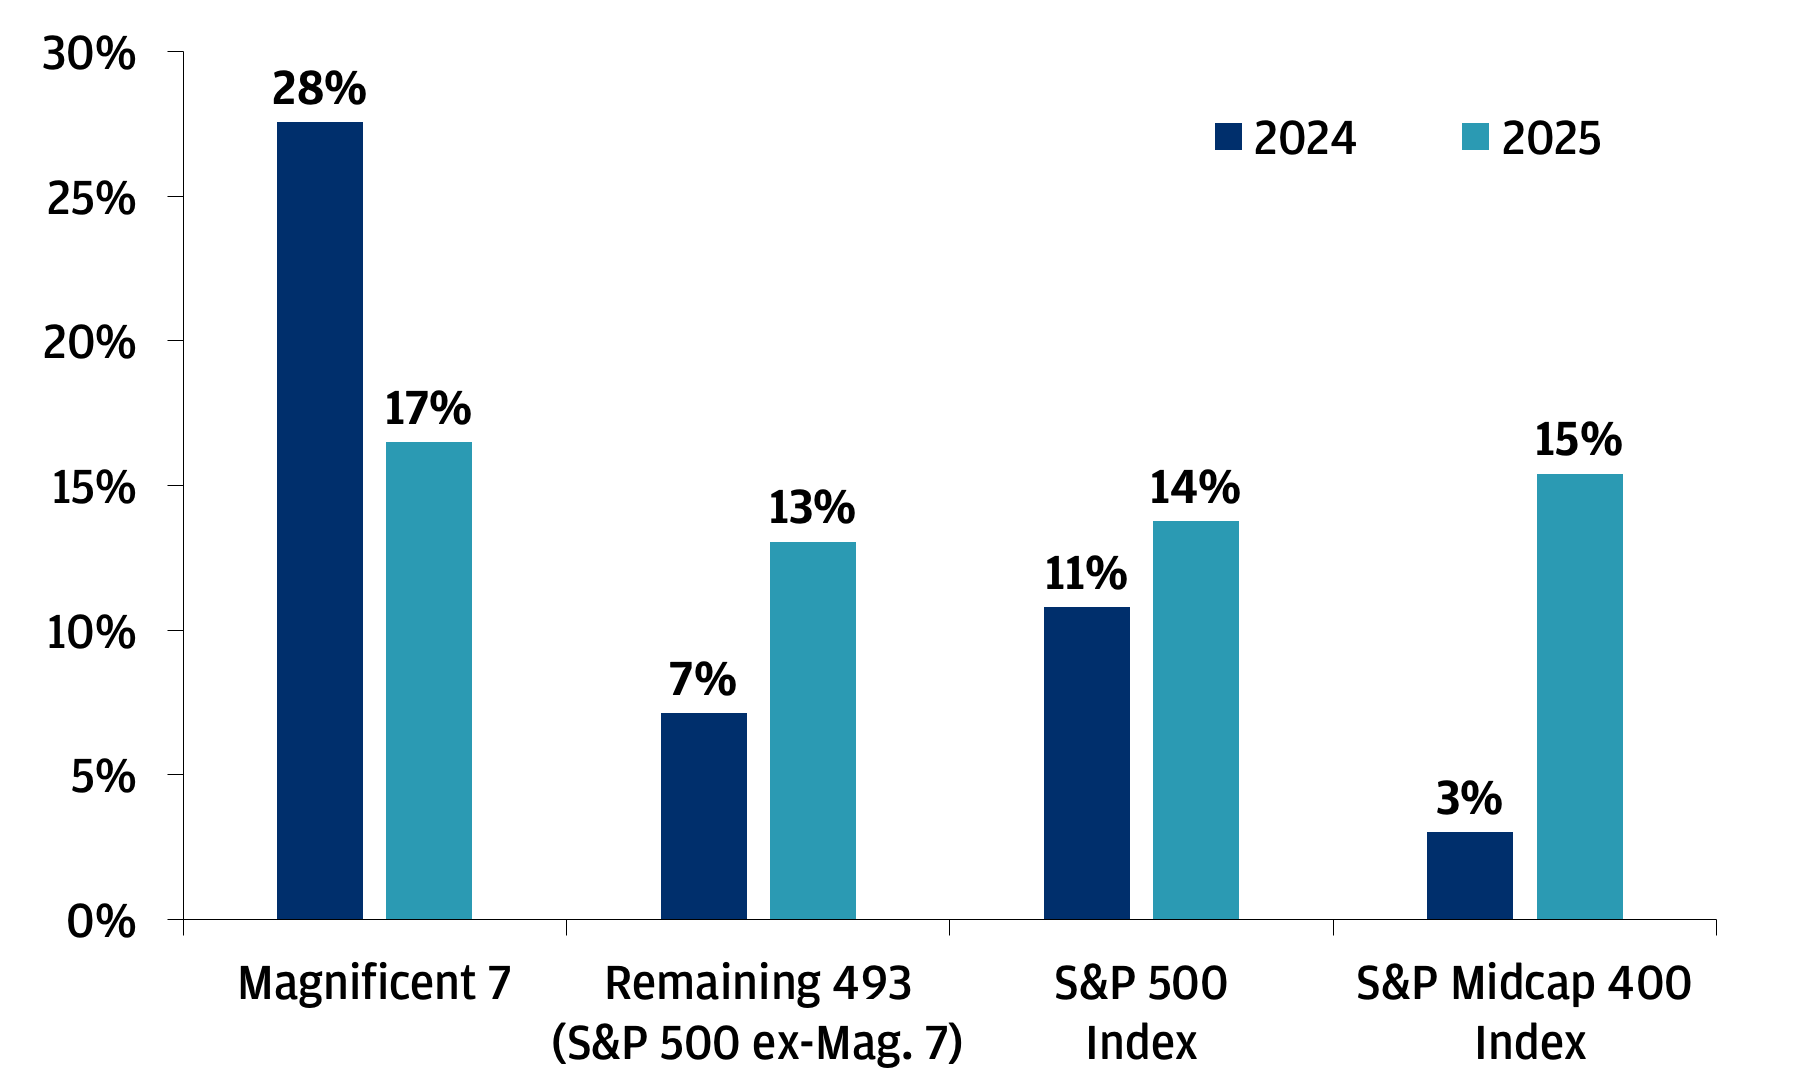 This chart shows earnings per share (EPS) consensus growth estimates by calendar year for the Magnificent 7, the remaining 493 (the S&P 500 Index ex-the Magnificent 7), the S&P 500 Index, and the S&P Midcap 400 Index.